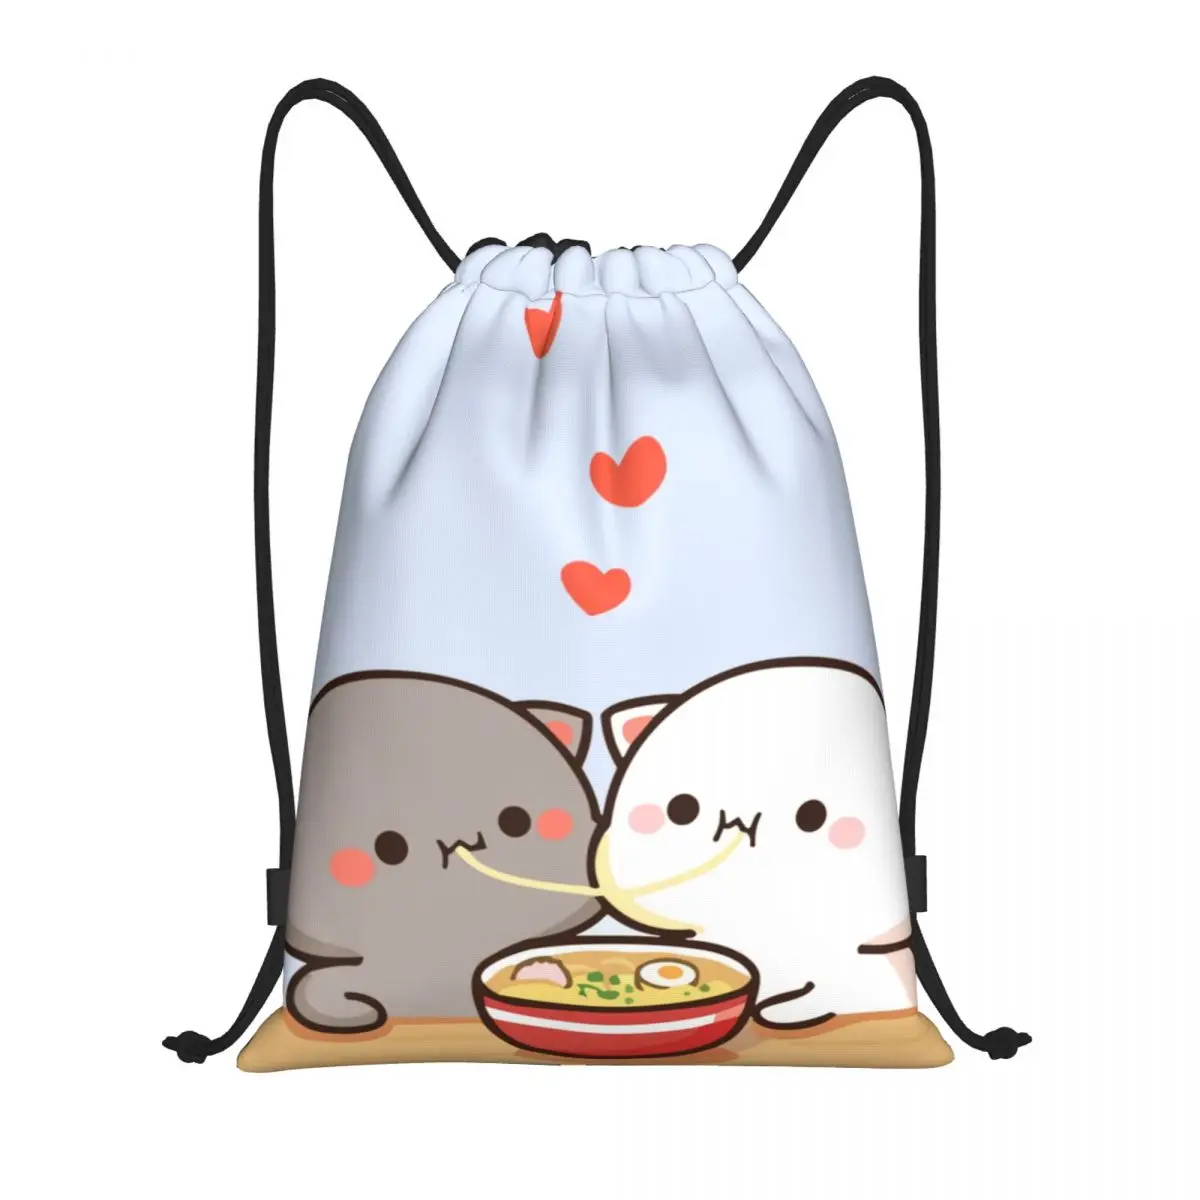 

Peach And Goma Mochi Cat Fall In Love Drawstring Backpack Bags Women Men Lightweight Gym Sports Sackpack Sacks for Shopping